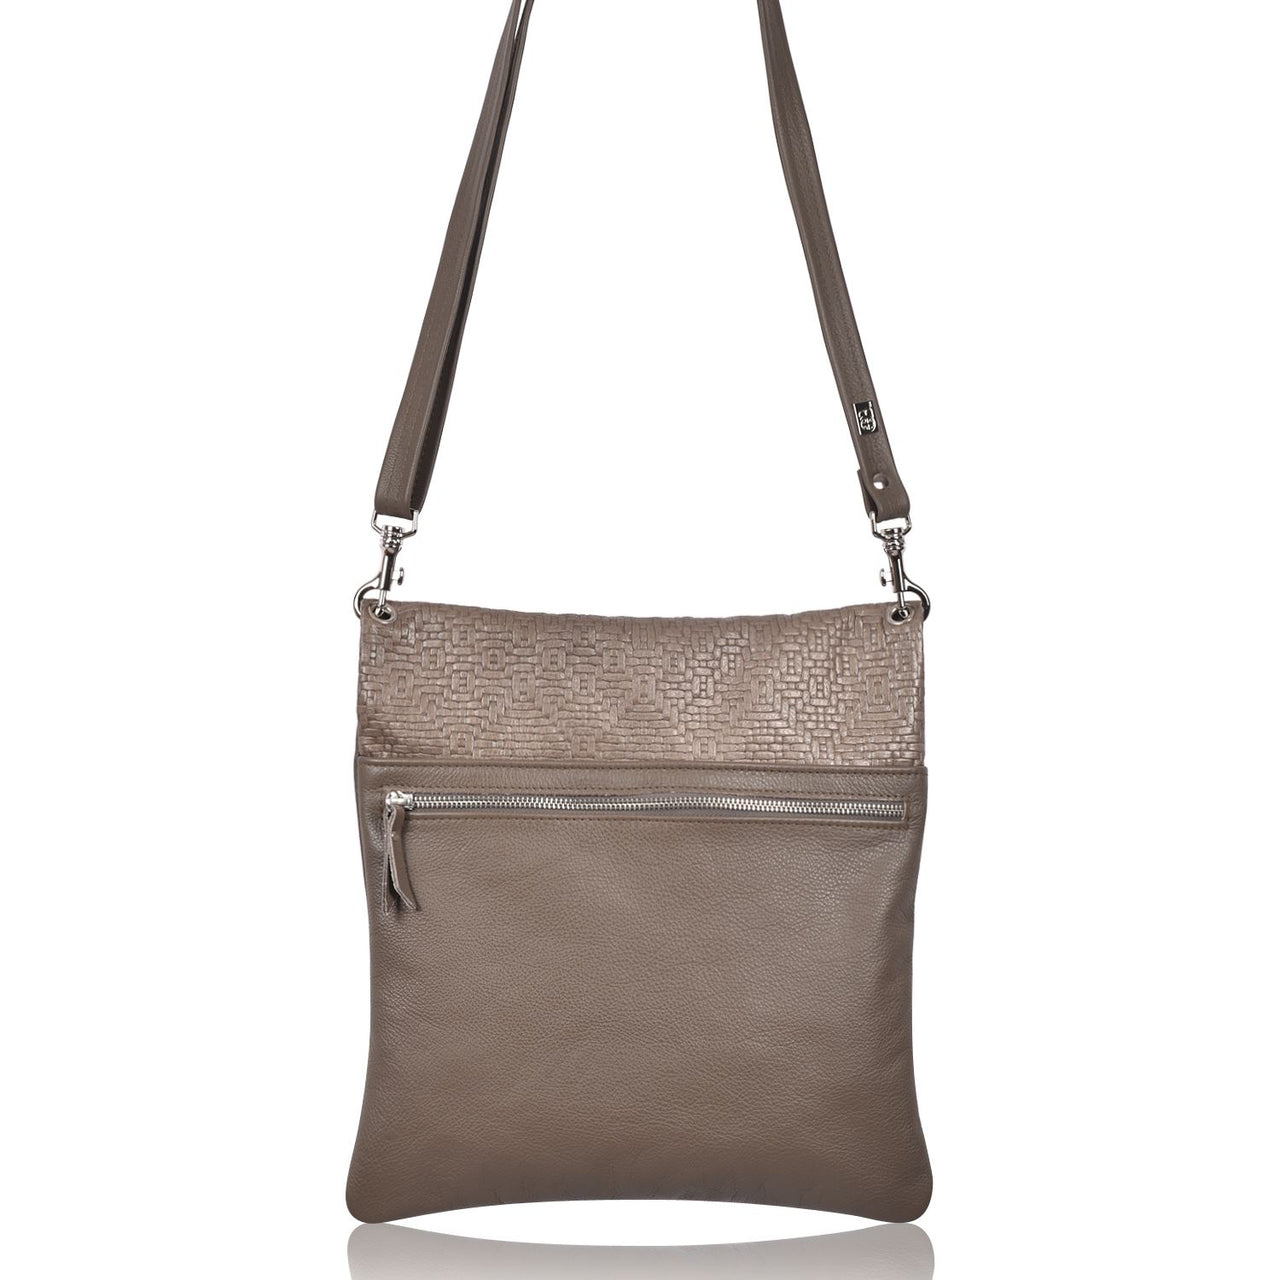 Owen Barry Z Top Sac Large Leather Crossbody Clay Bag